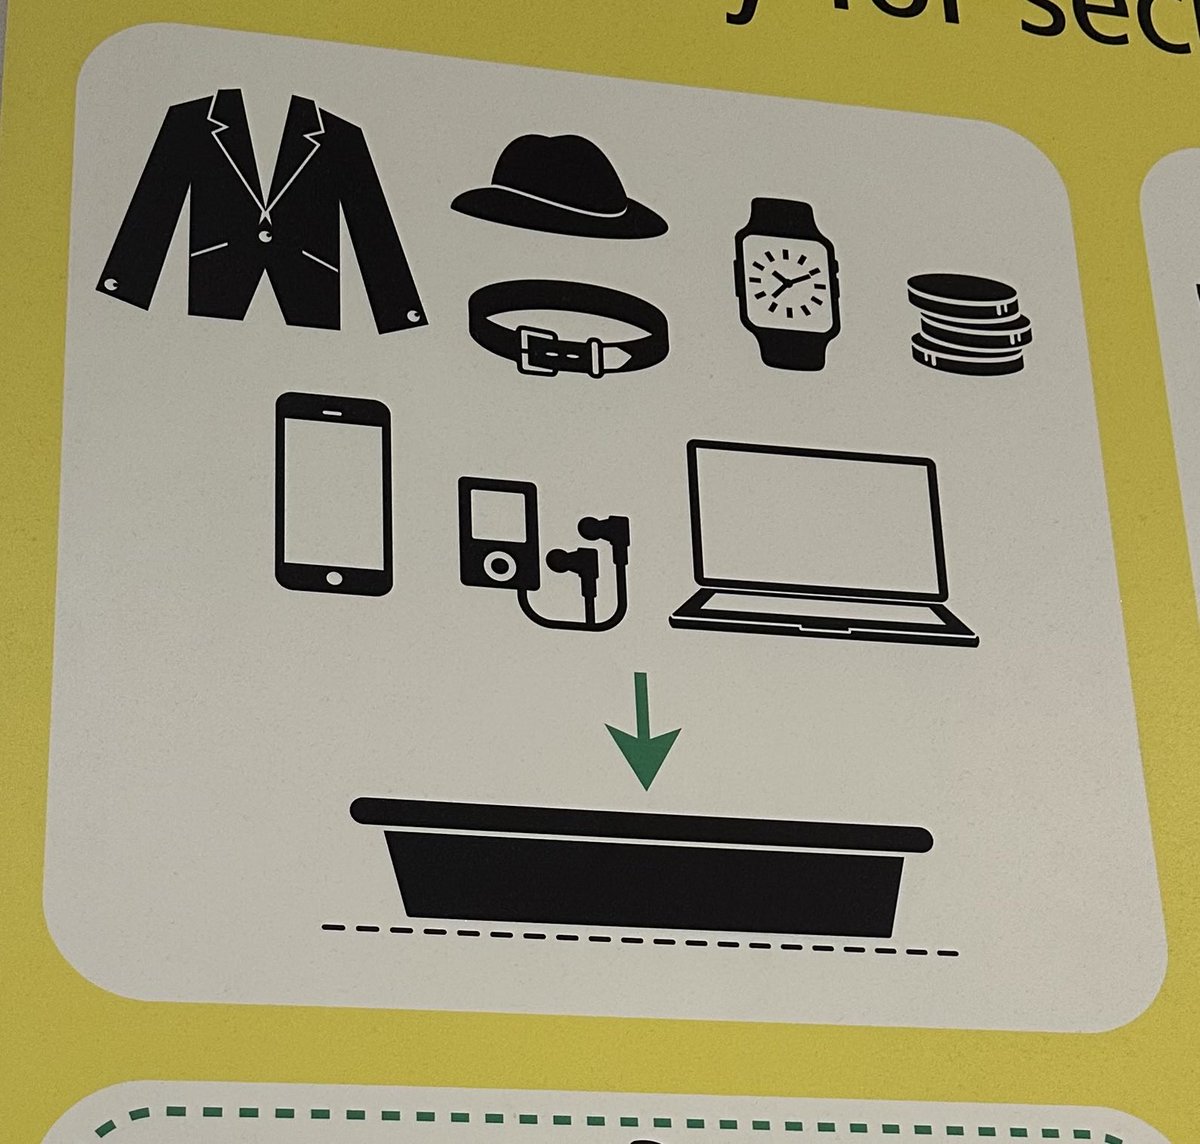 Only in Italy would airport security remind you to remove your tuxedo jacket and fedora 🤌